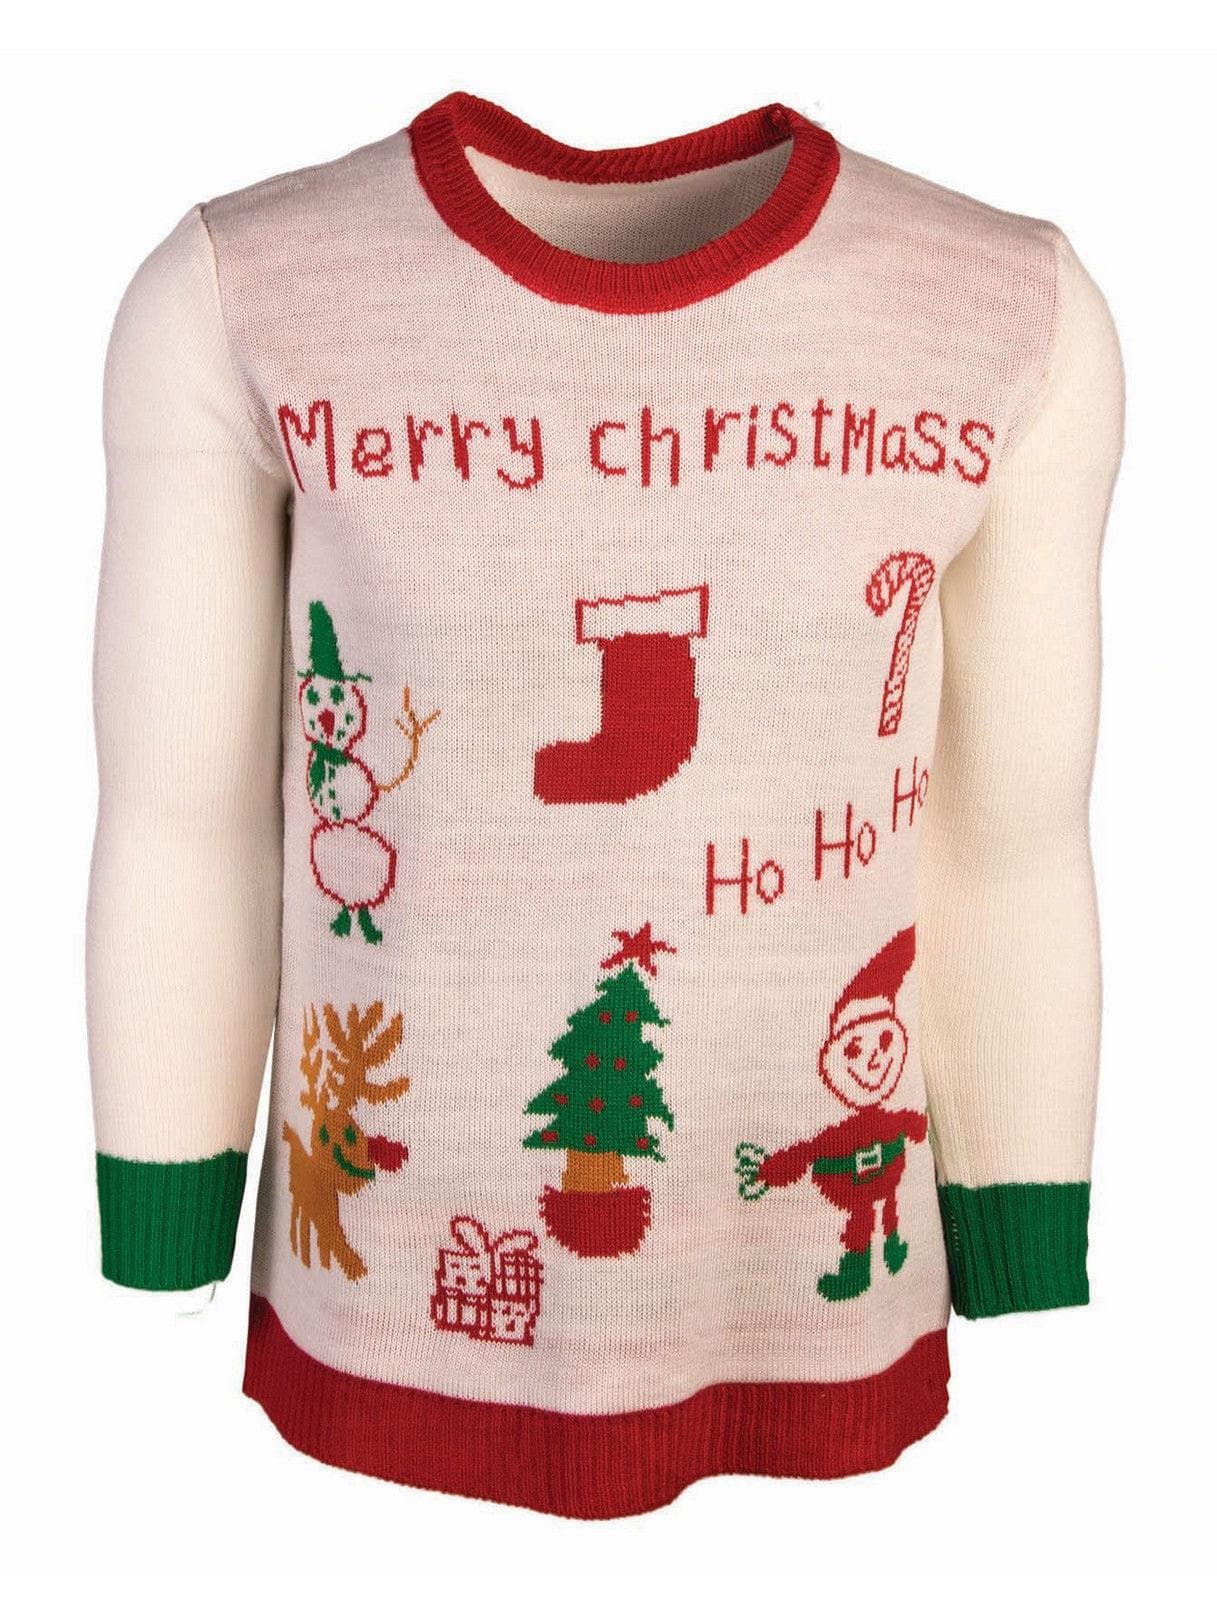 Adult Merry Christmas Sweater - costumes.com